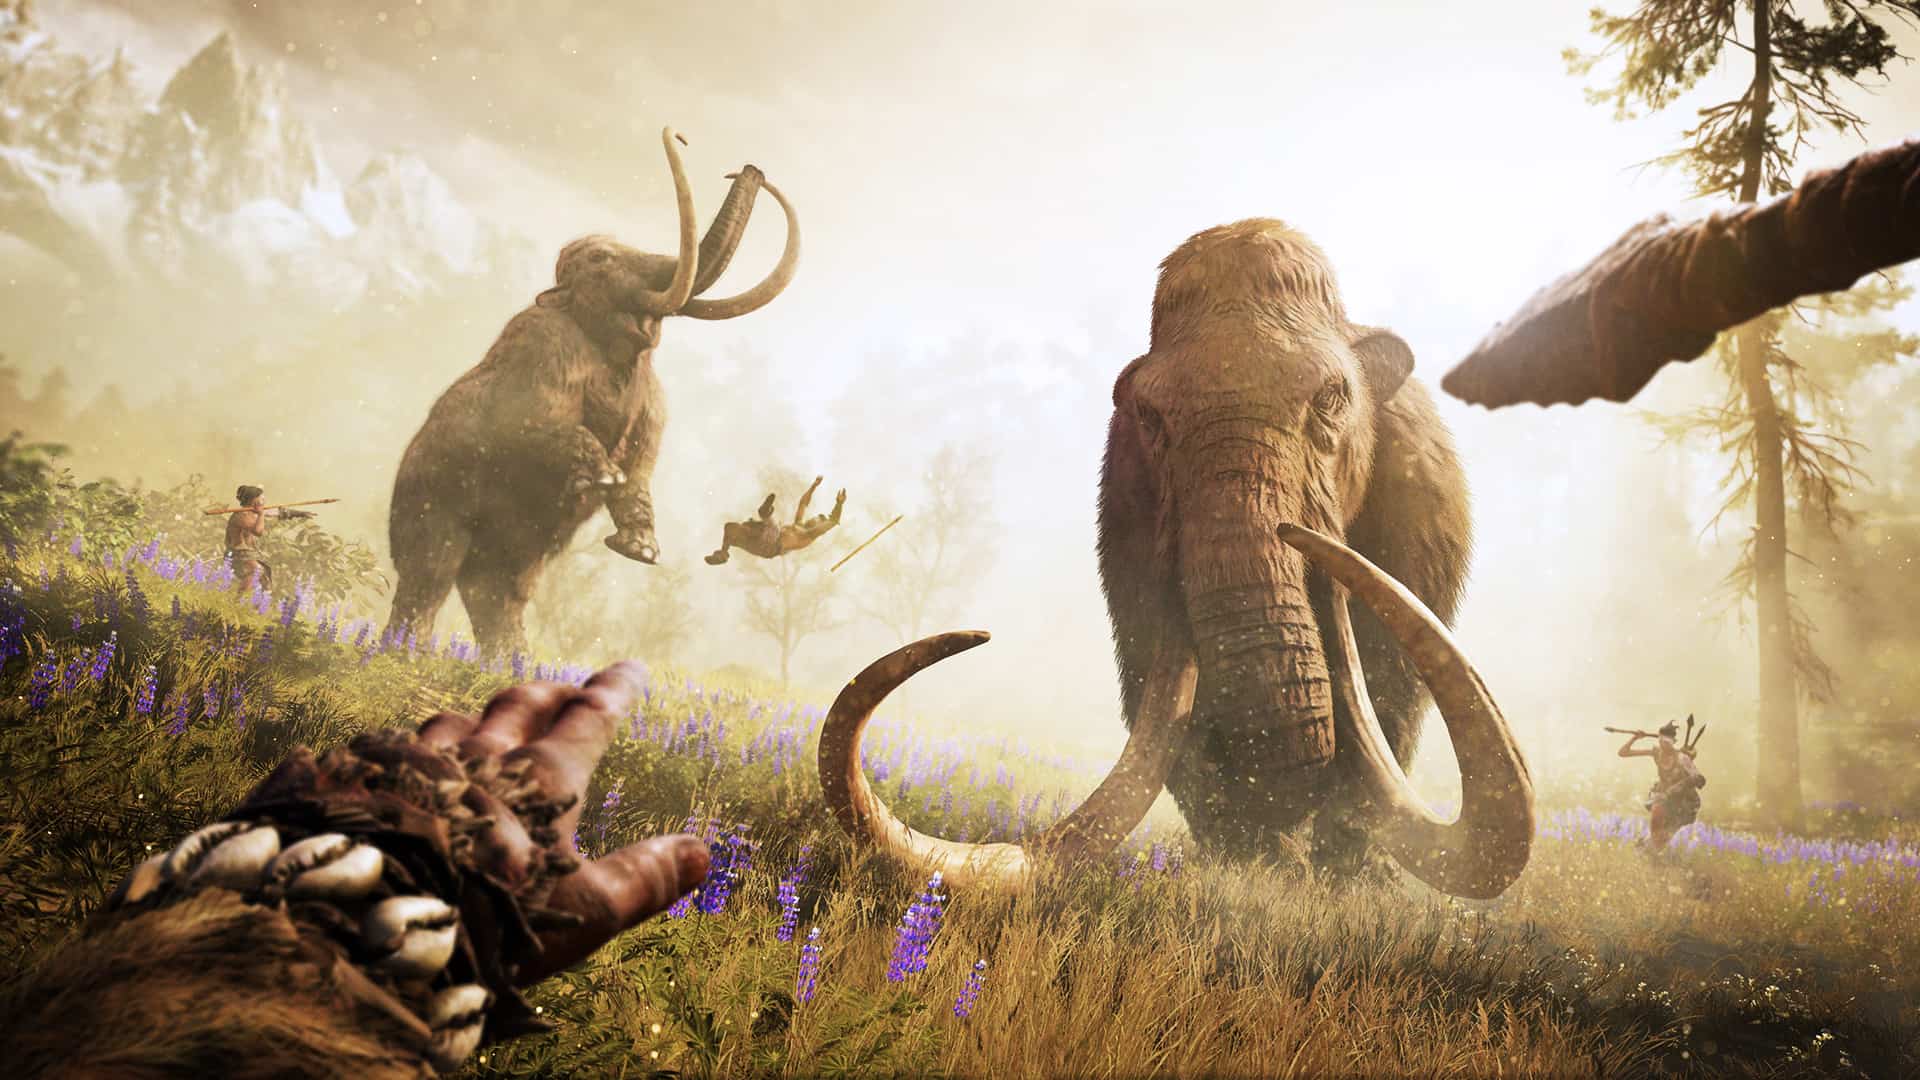 Screencapture from Far Cry Primal gameplay